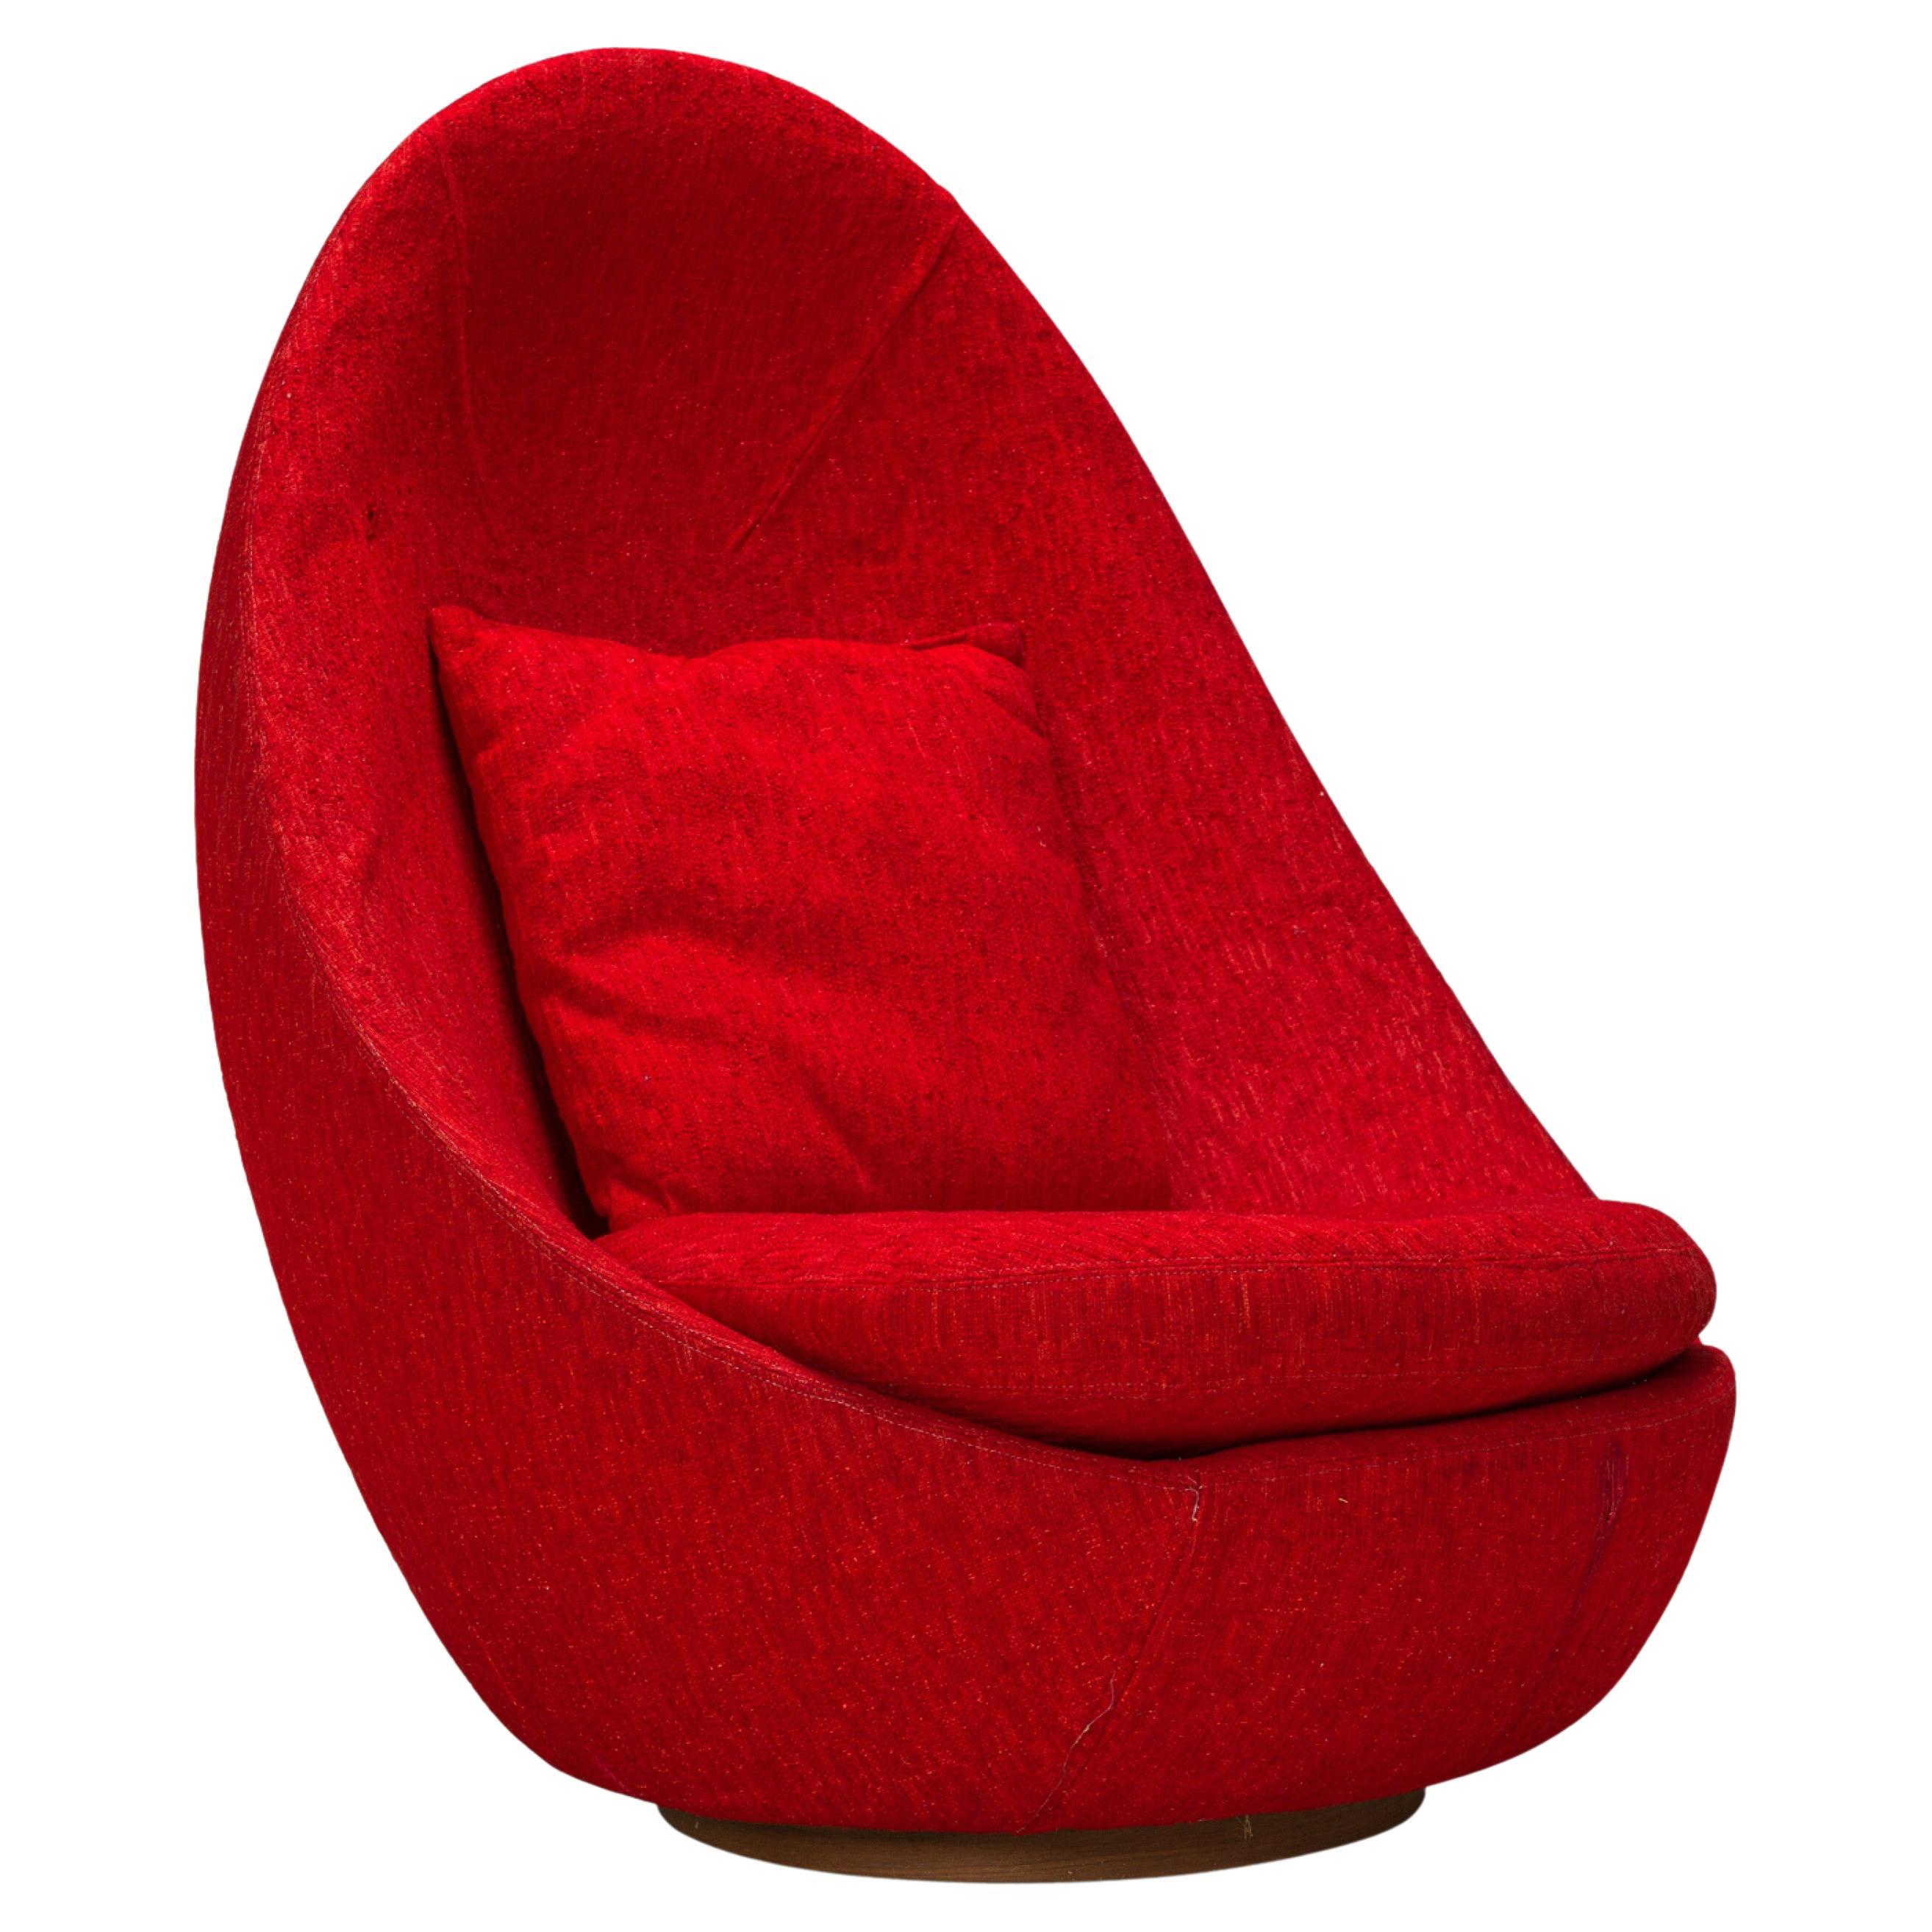 Milo Baughman American Mid-Century Red Textured Upholstered Swivel Egg Chair